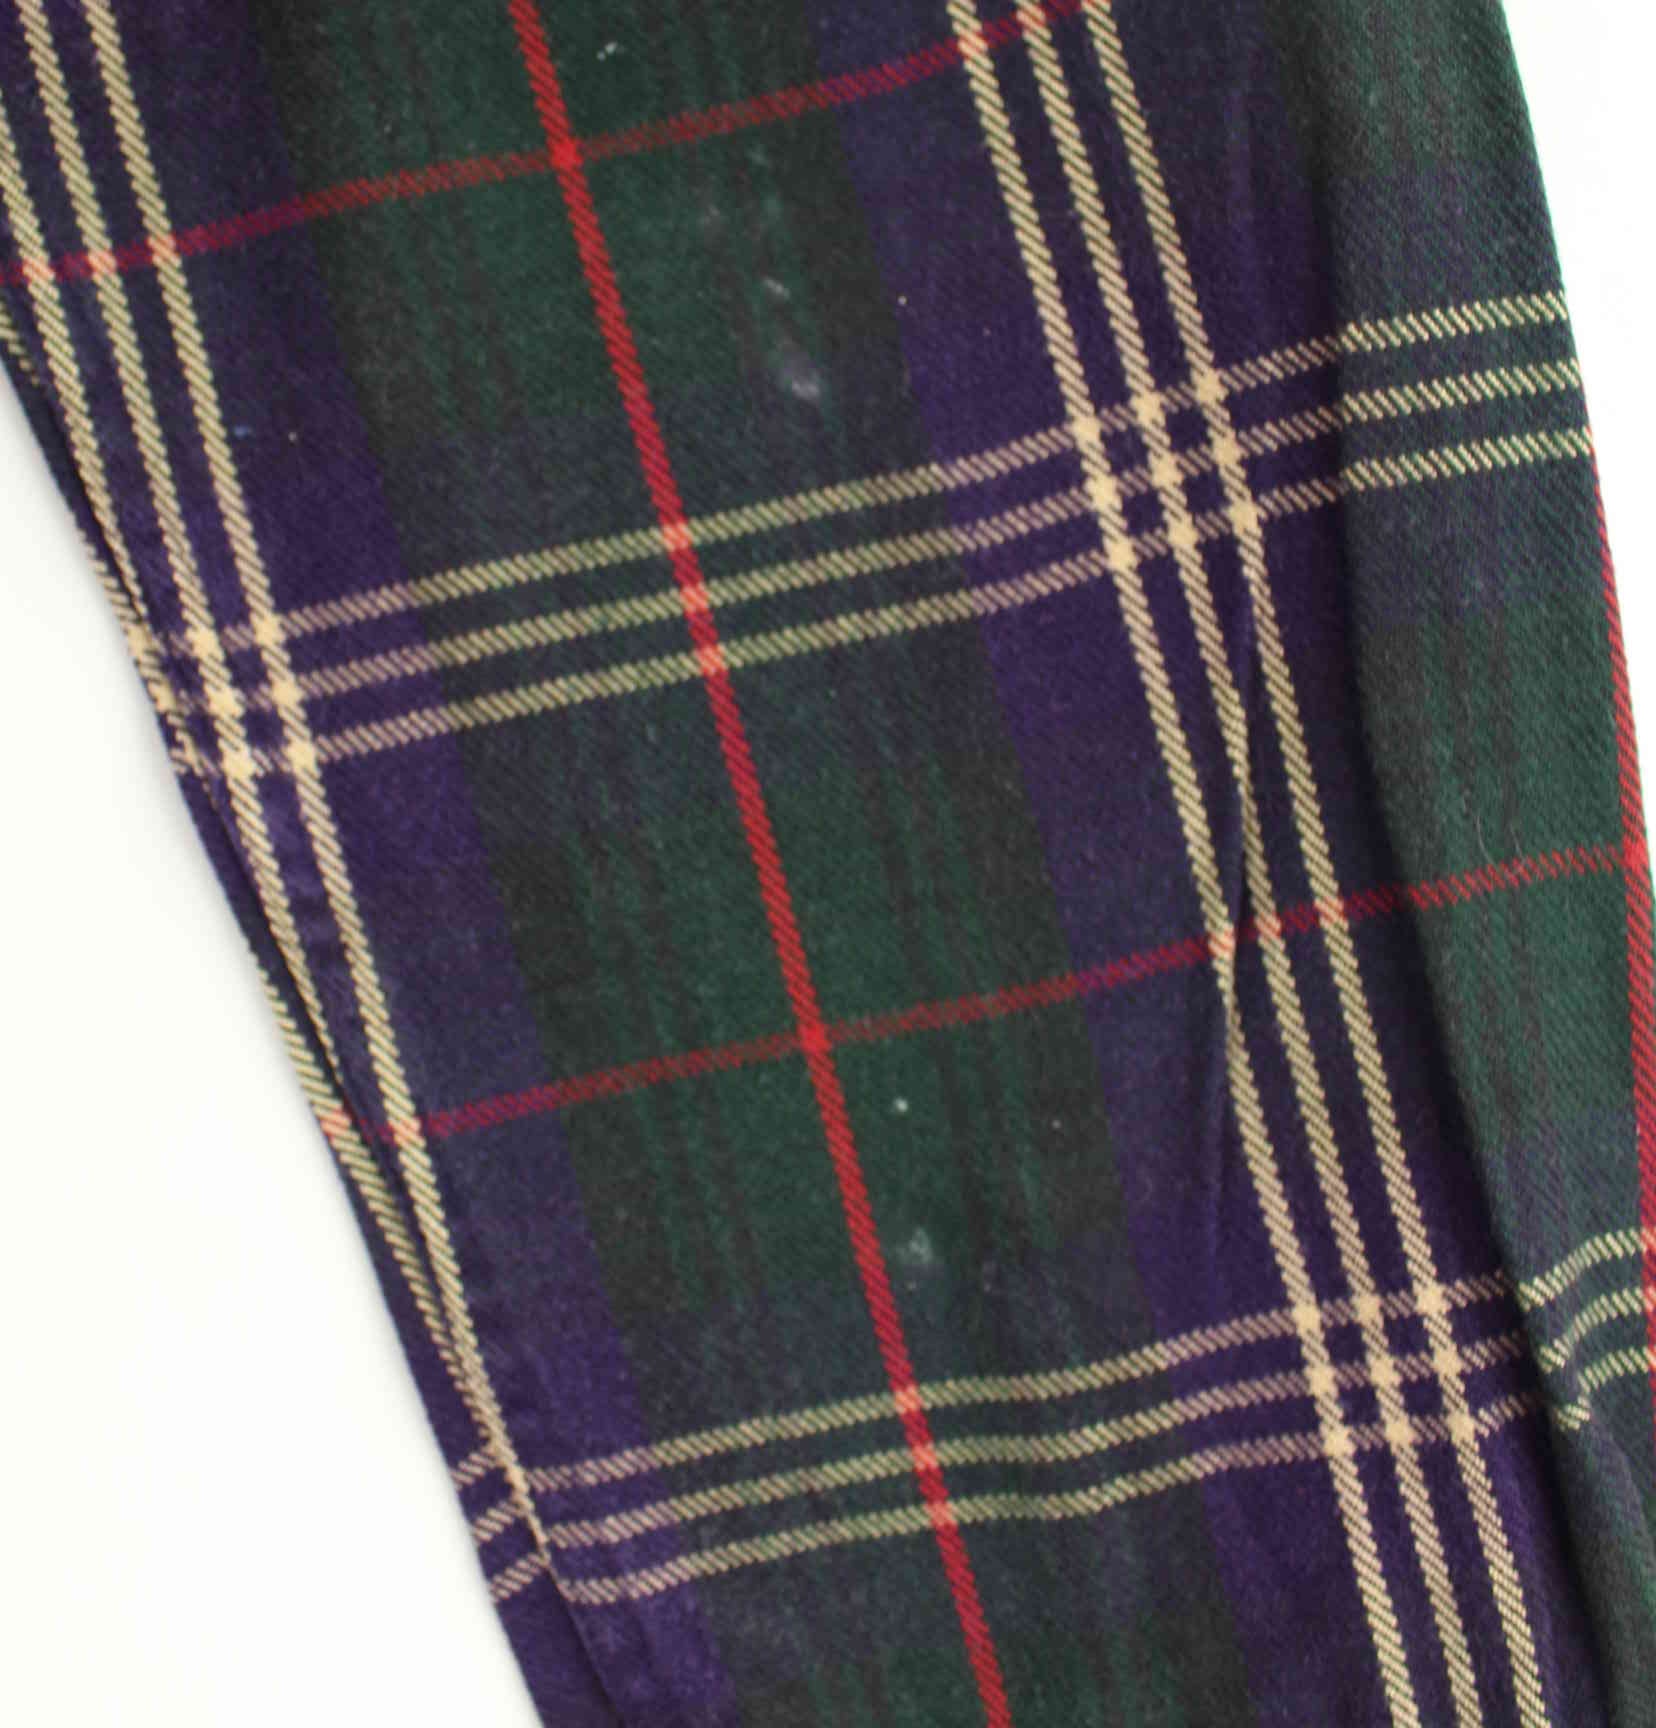 Barbour Flanell Hemd Mehrfarbig XL (detail image 6)